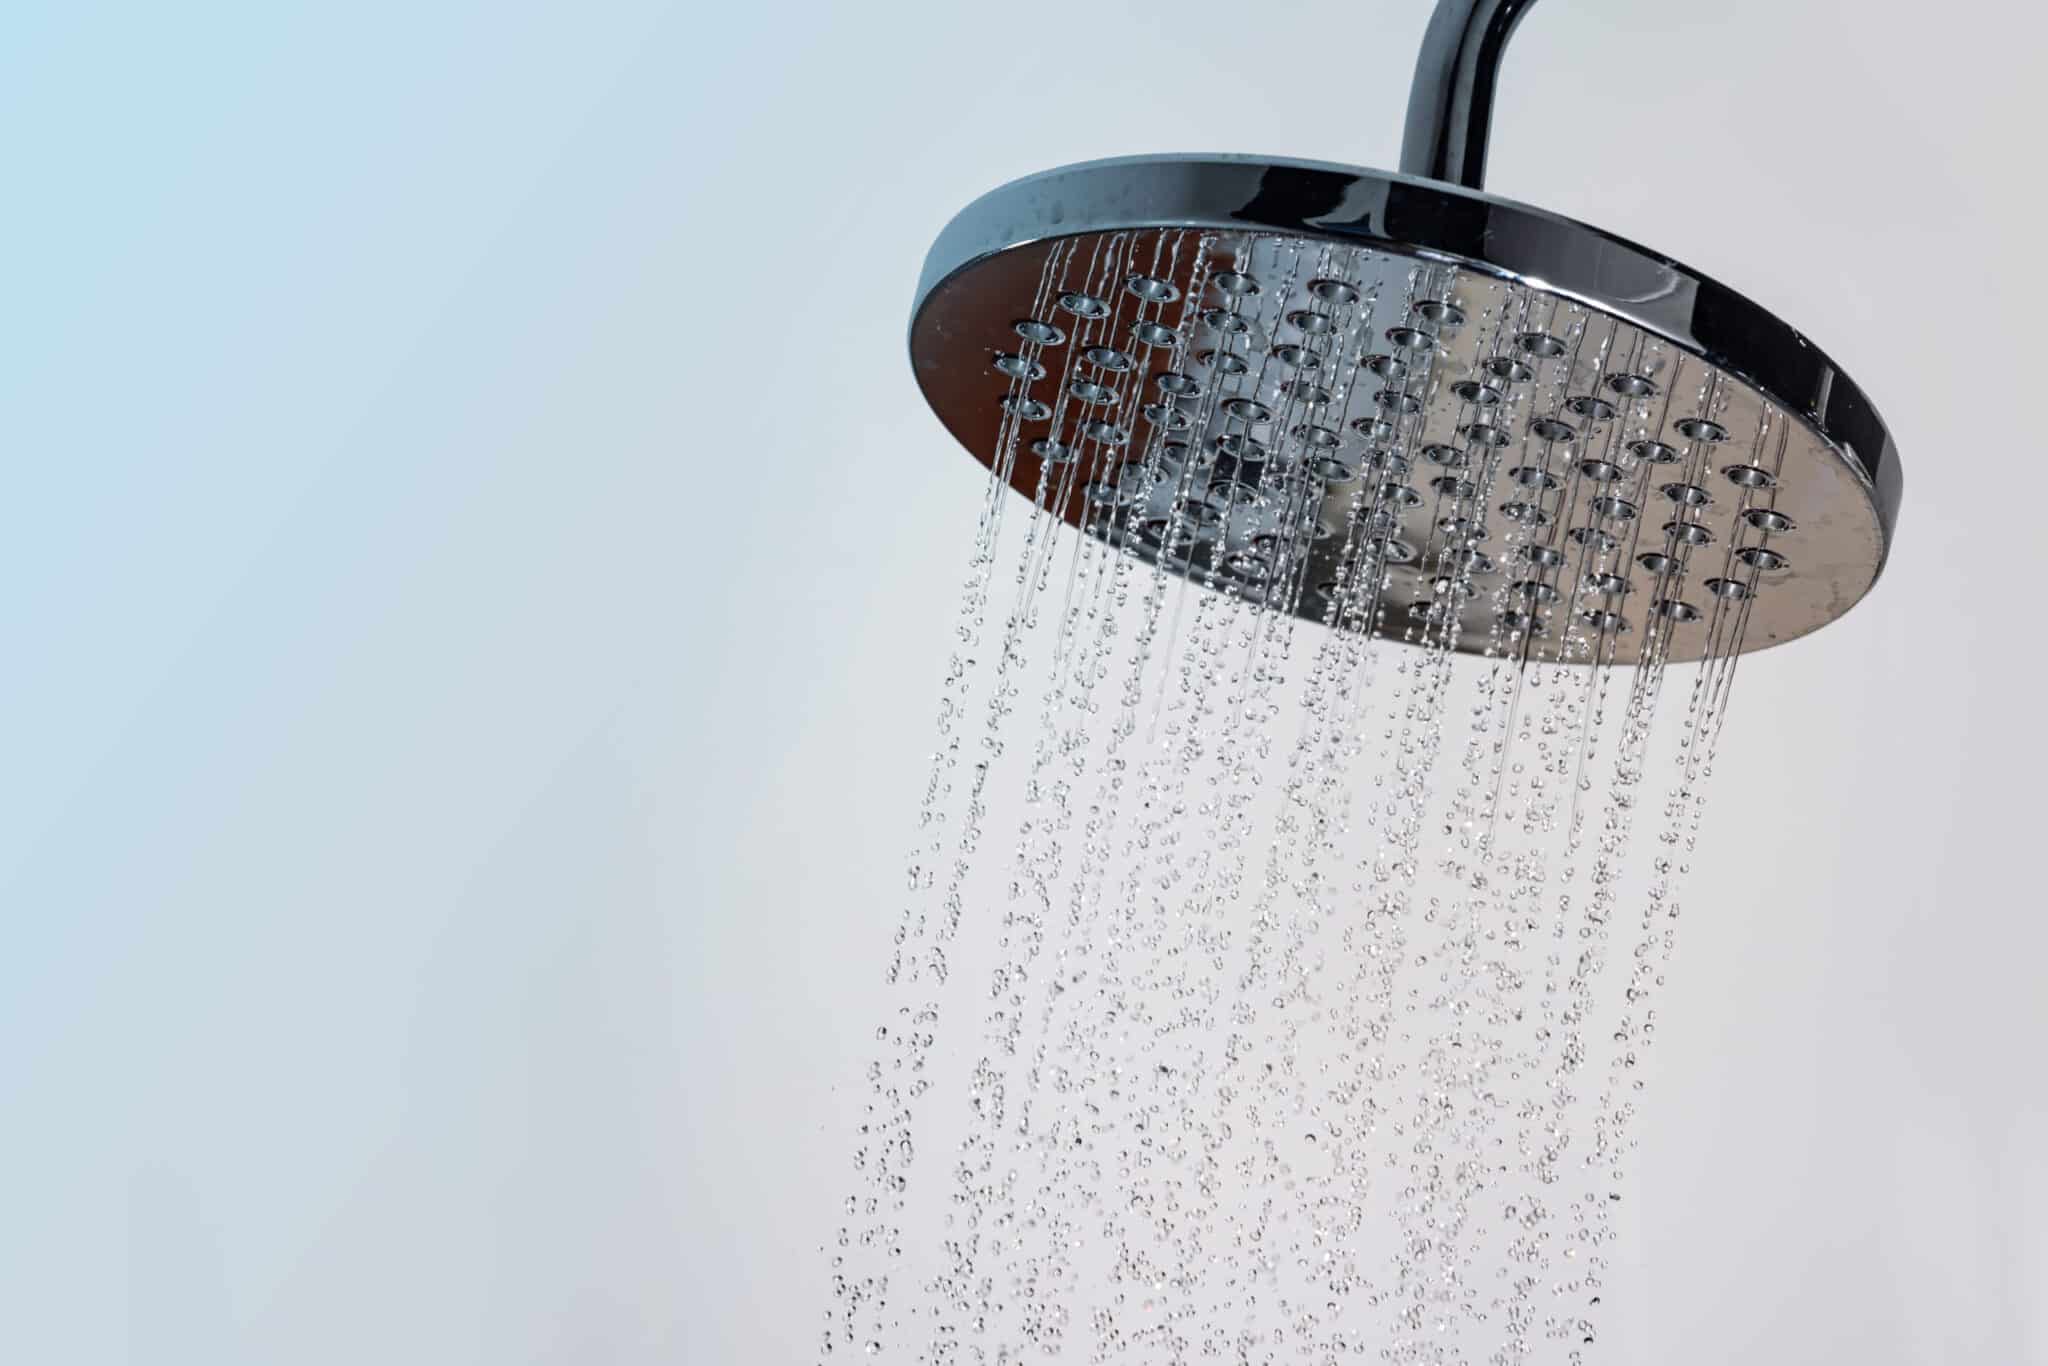 Water pressure from a shower head.